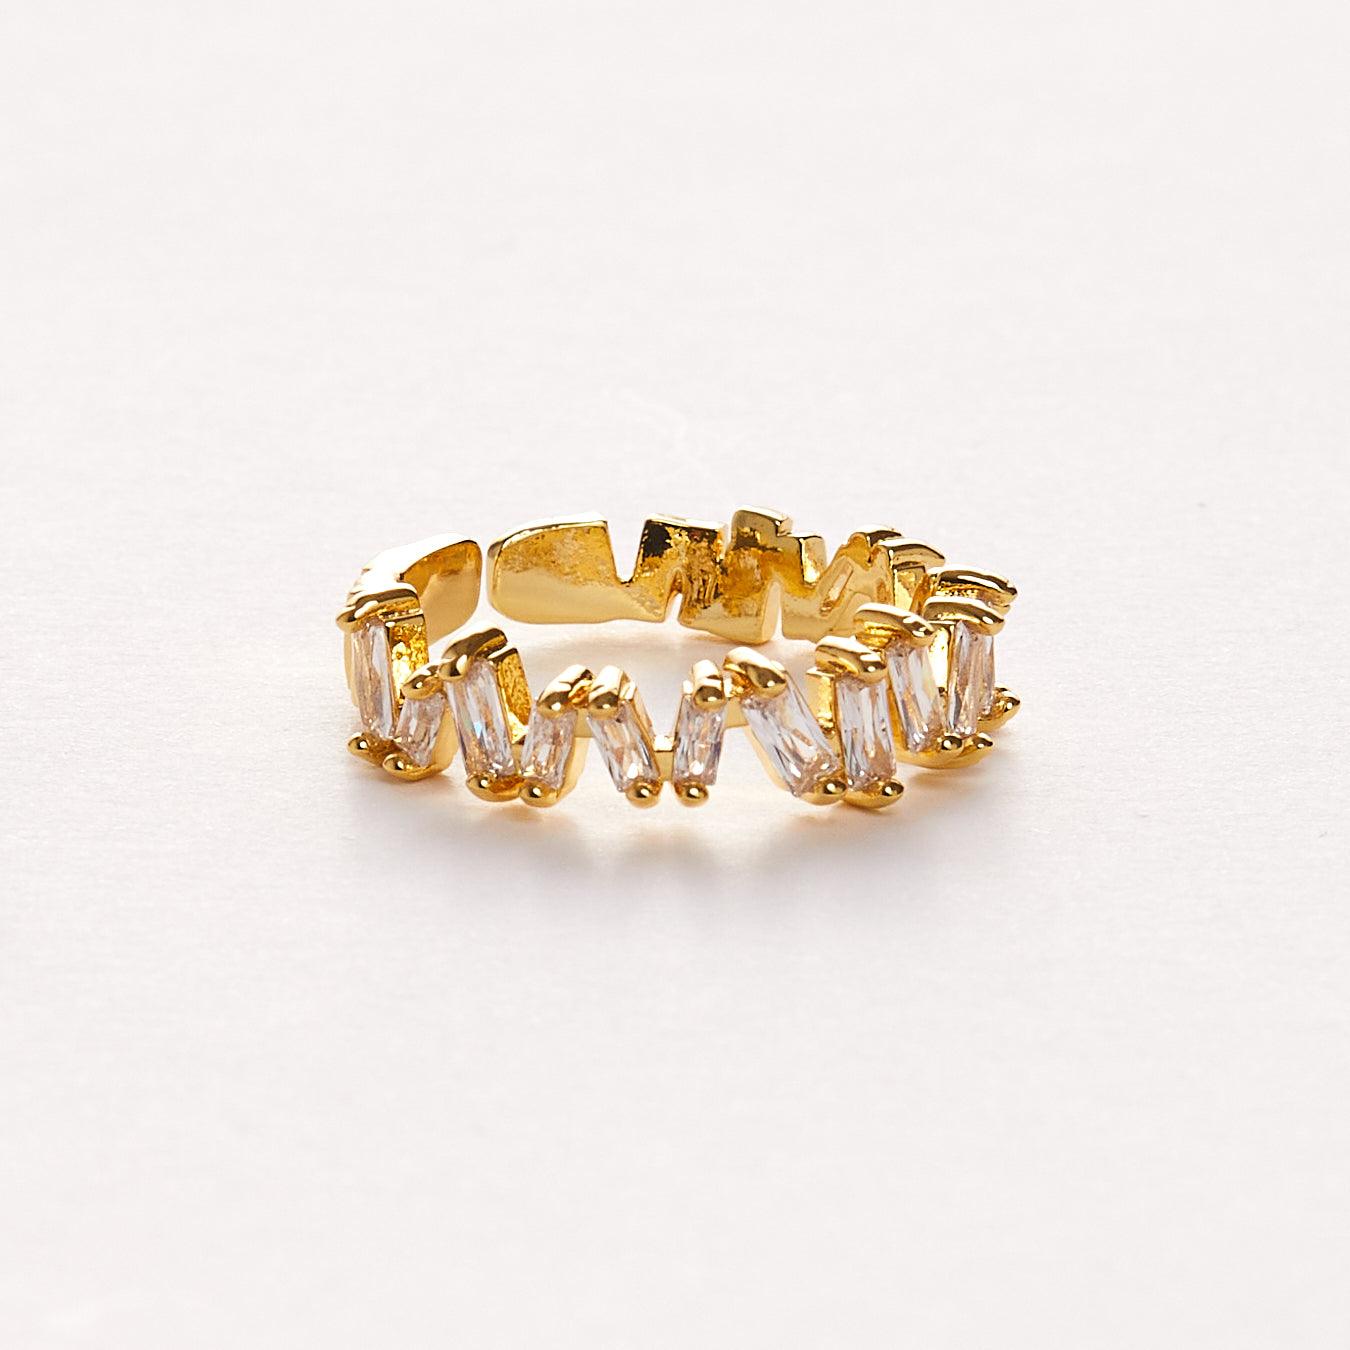 TFC Jollyjump Gold Plated Adjustable Ring